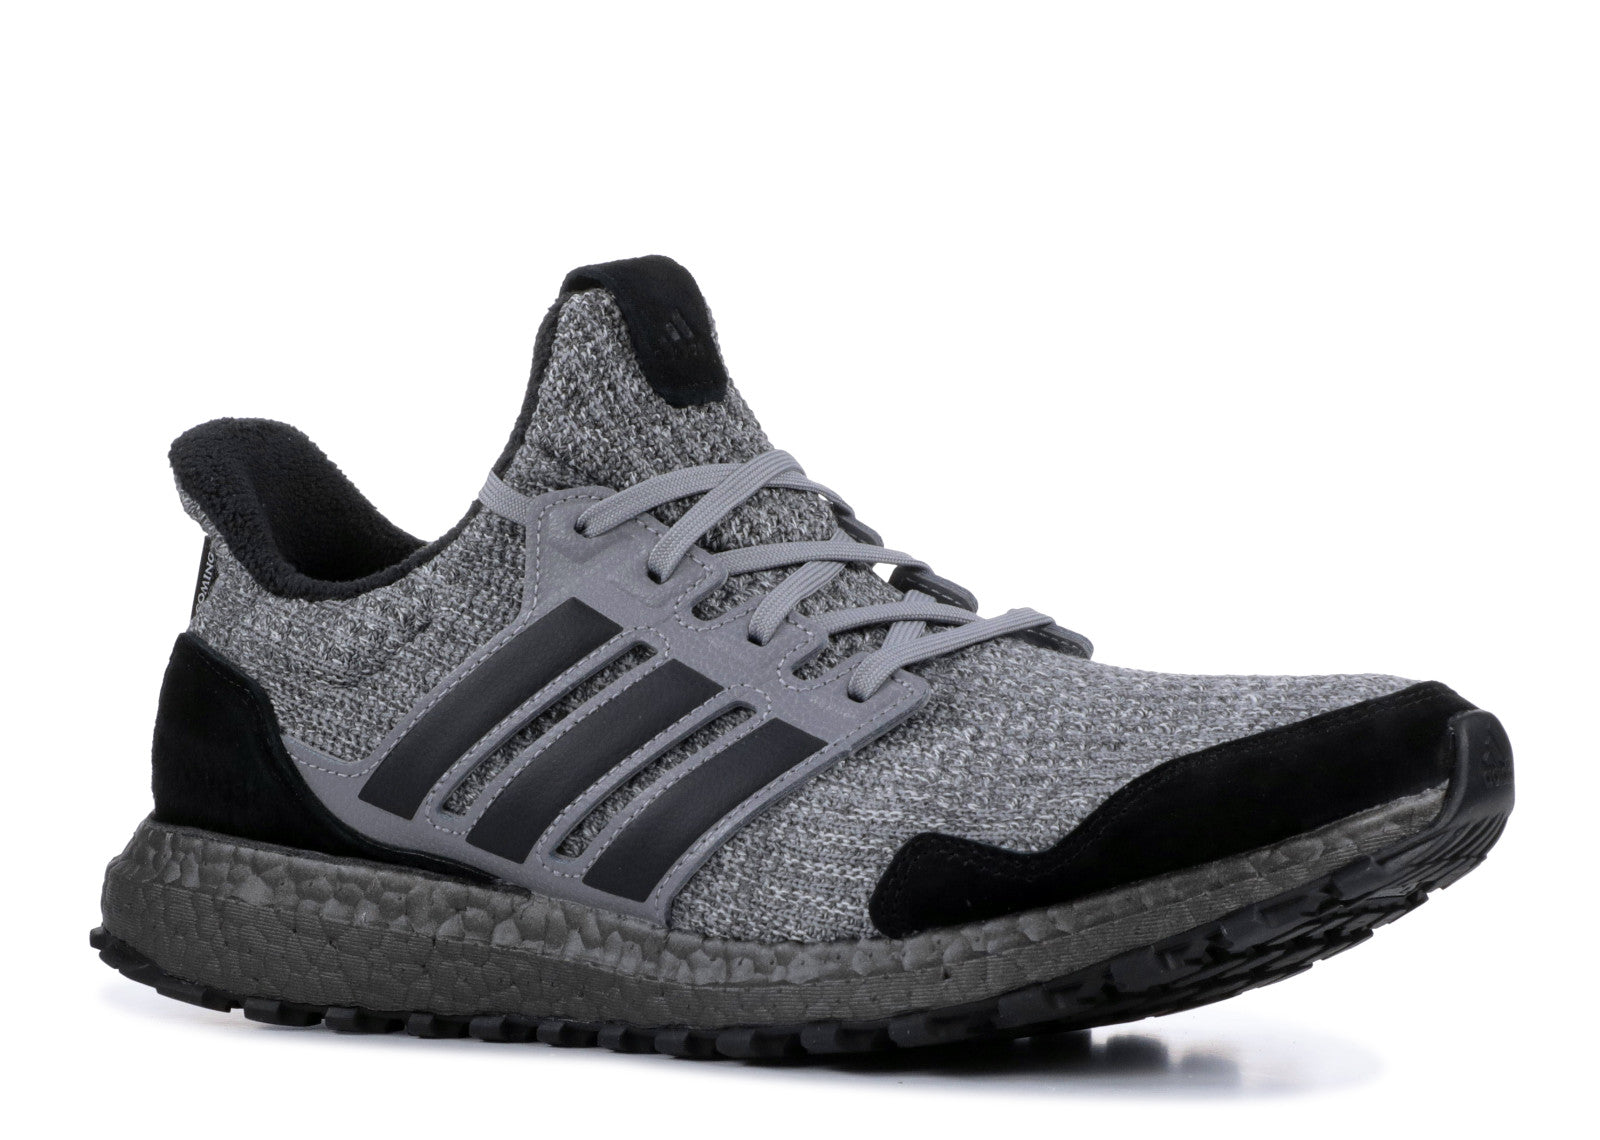 adidas ultra boost 4.0 game of thrones house stark